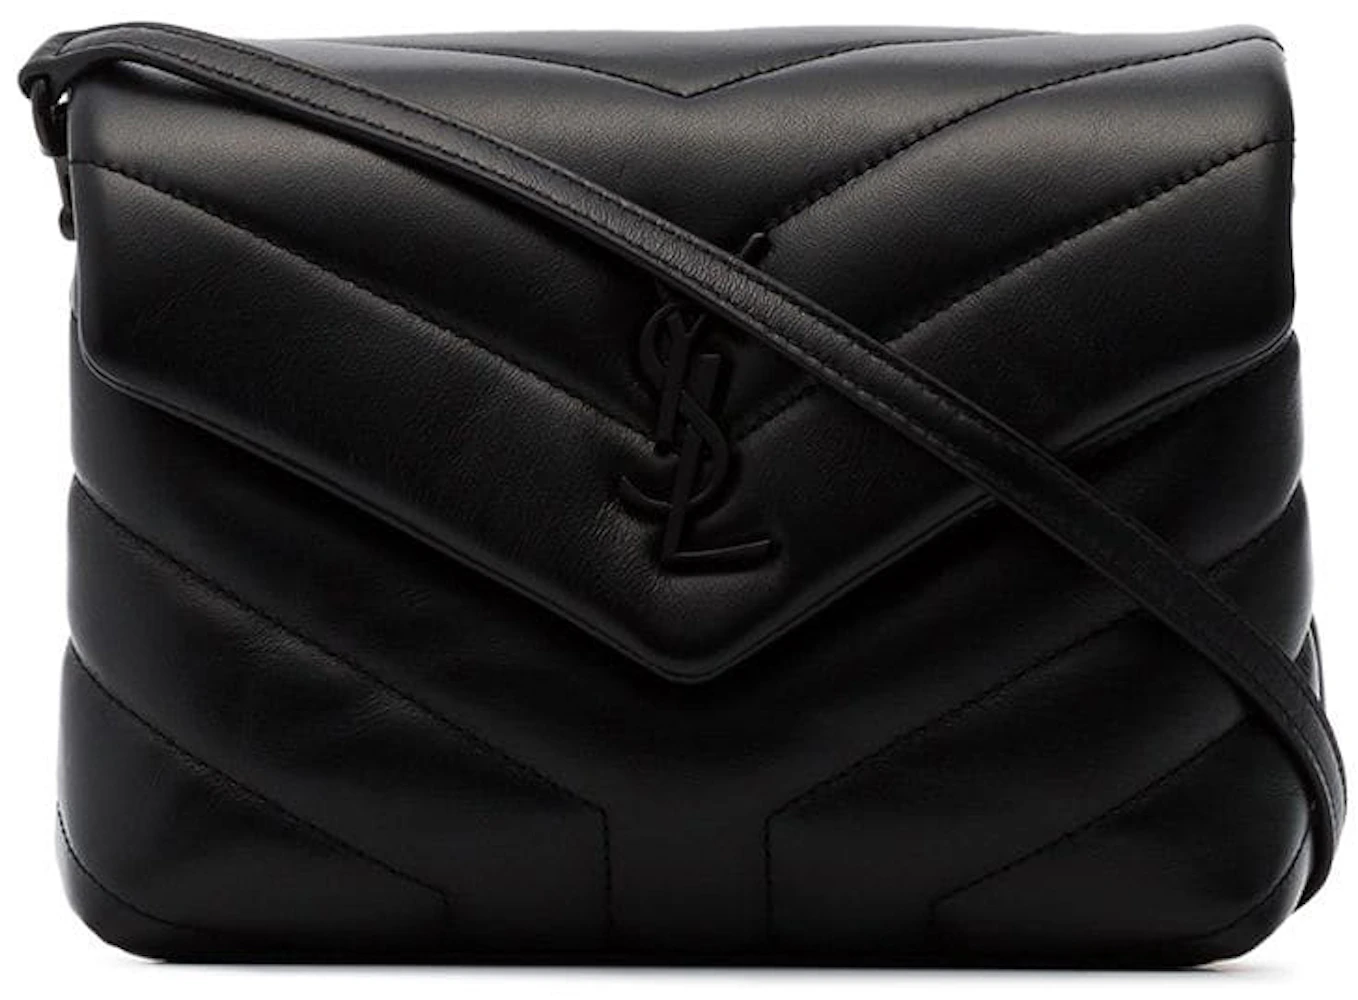 Black Loulou Toy quilted leather shoulder bag